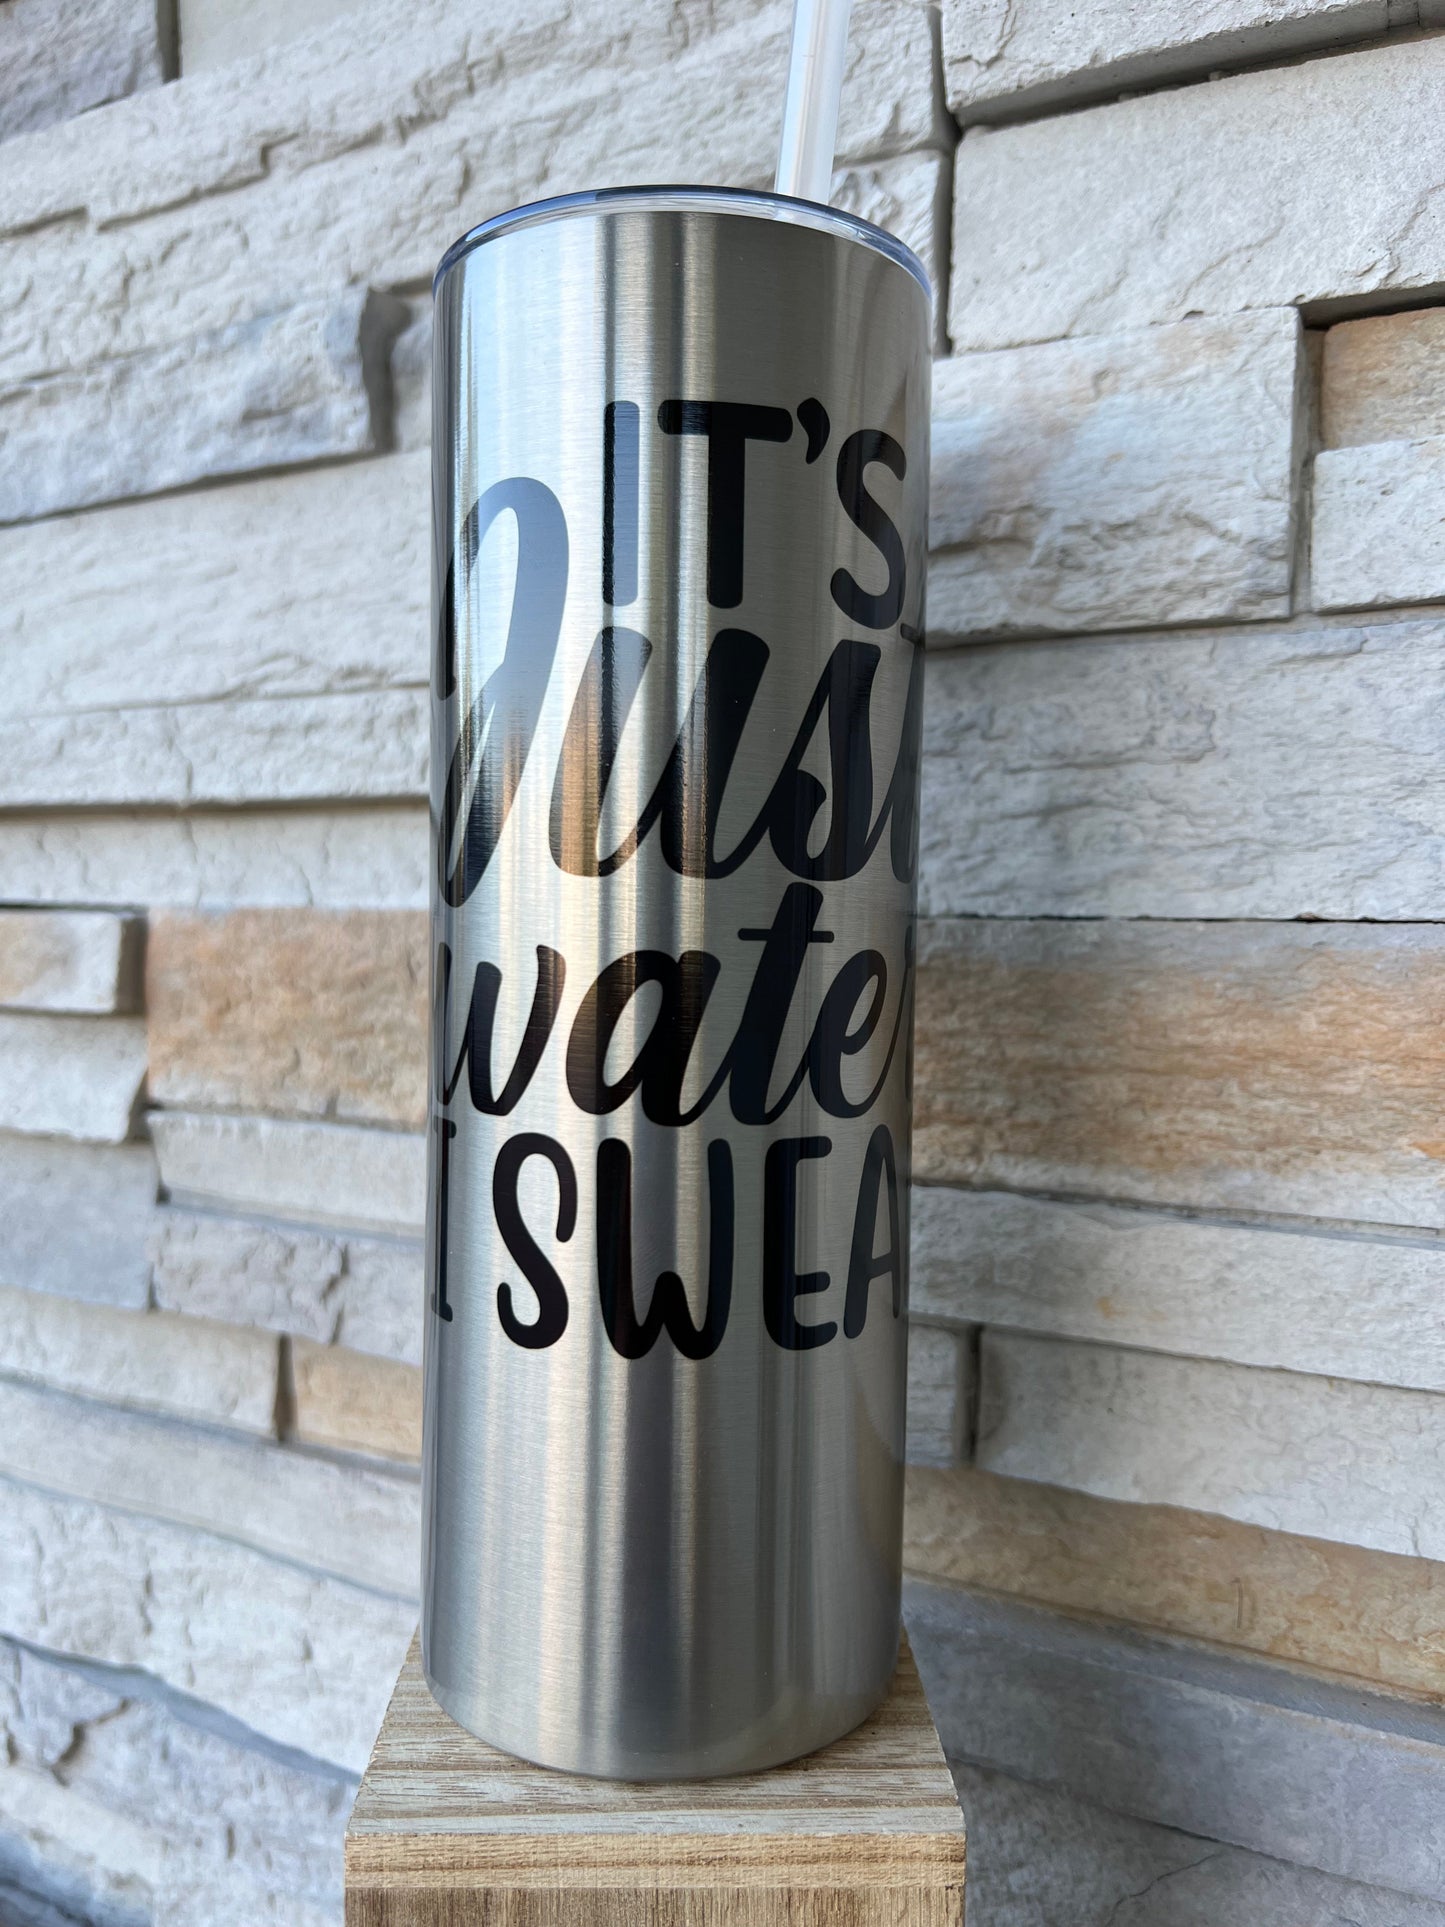 It’s Just Water I Swear 20oz Skinny Sublimation Tumbler